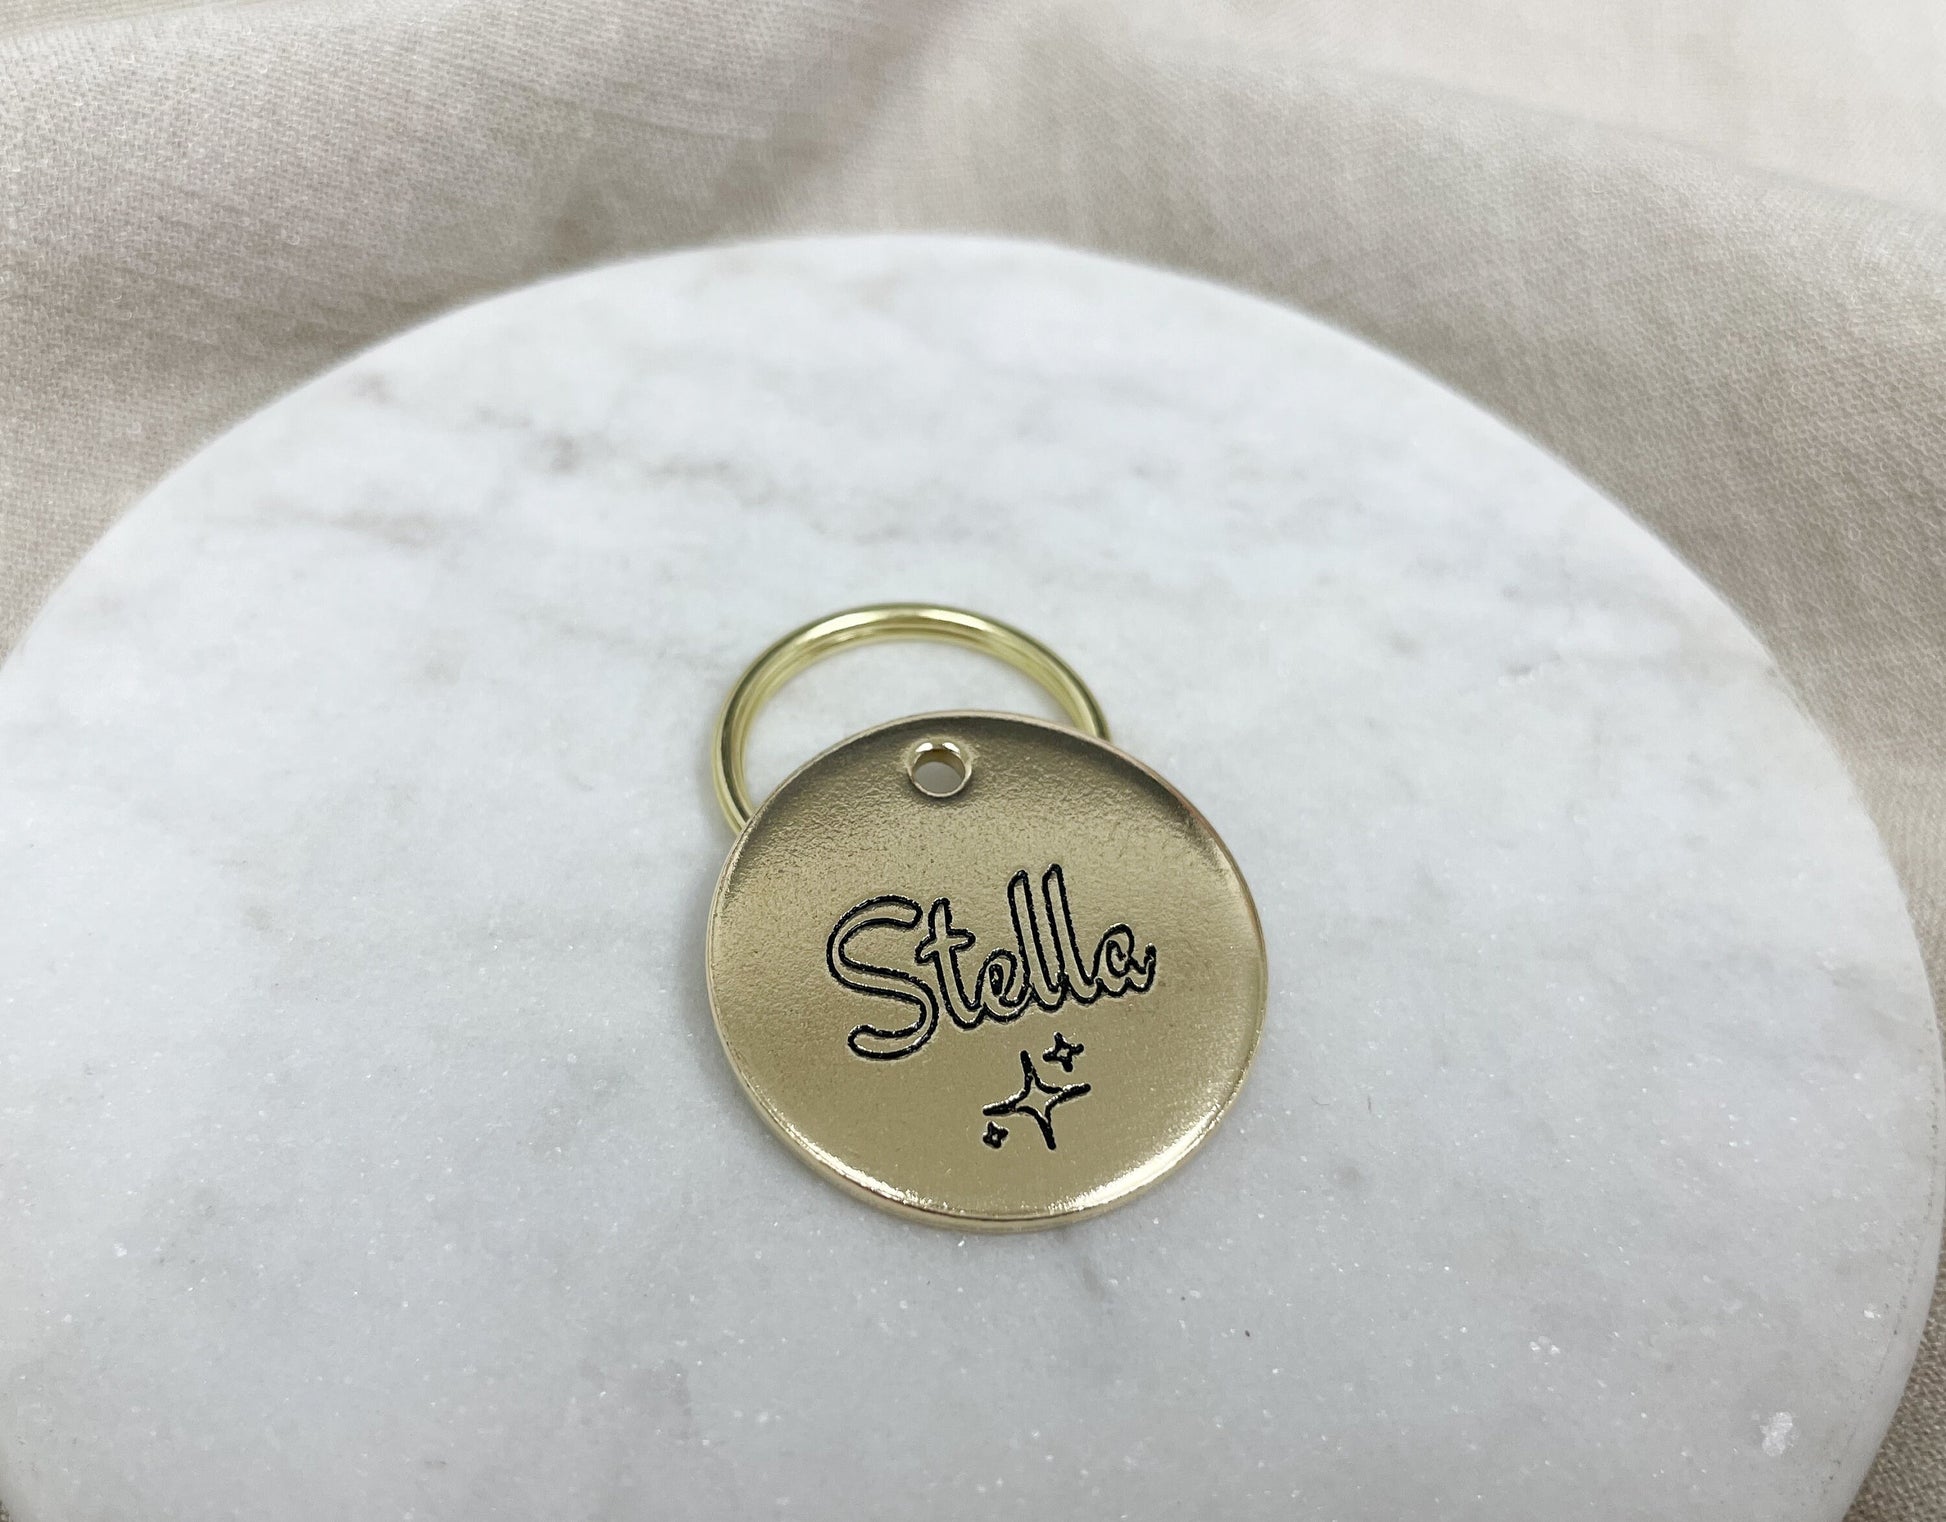 Sparkle Design Engraved Dog Tag - Star Design-  Cat ID Tag - Dog Collar Tag - Custom Tag - Personalized Tag - Pet ID Tag - Pet Name Tag - Pet Tag - Sparkle Tag - Emoji Pet Tag